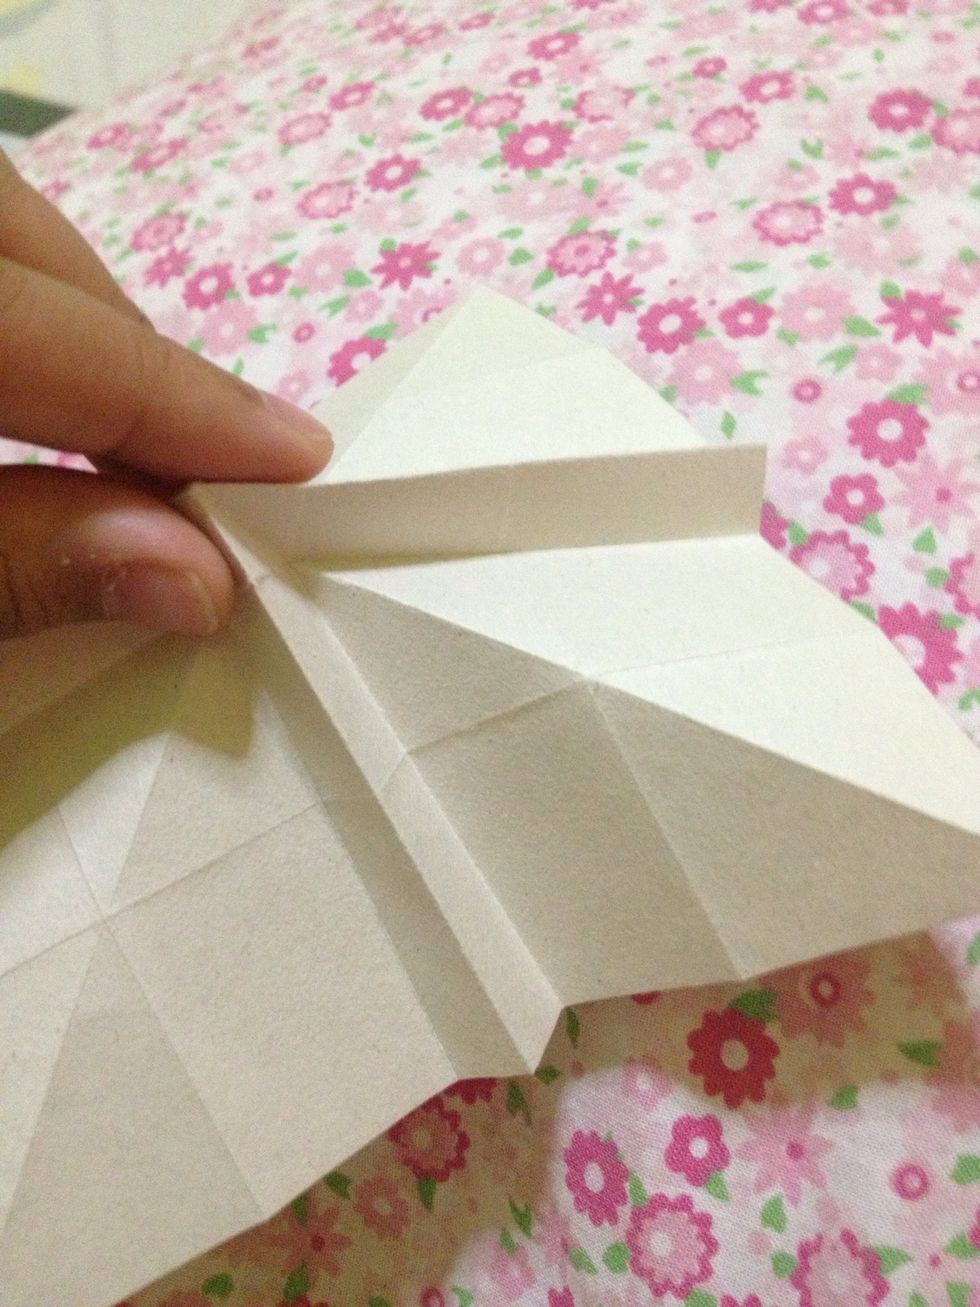 Then, pinch this tip and fold this corner. Do the same on the other side.